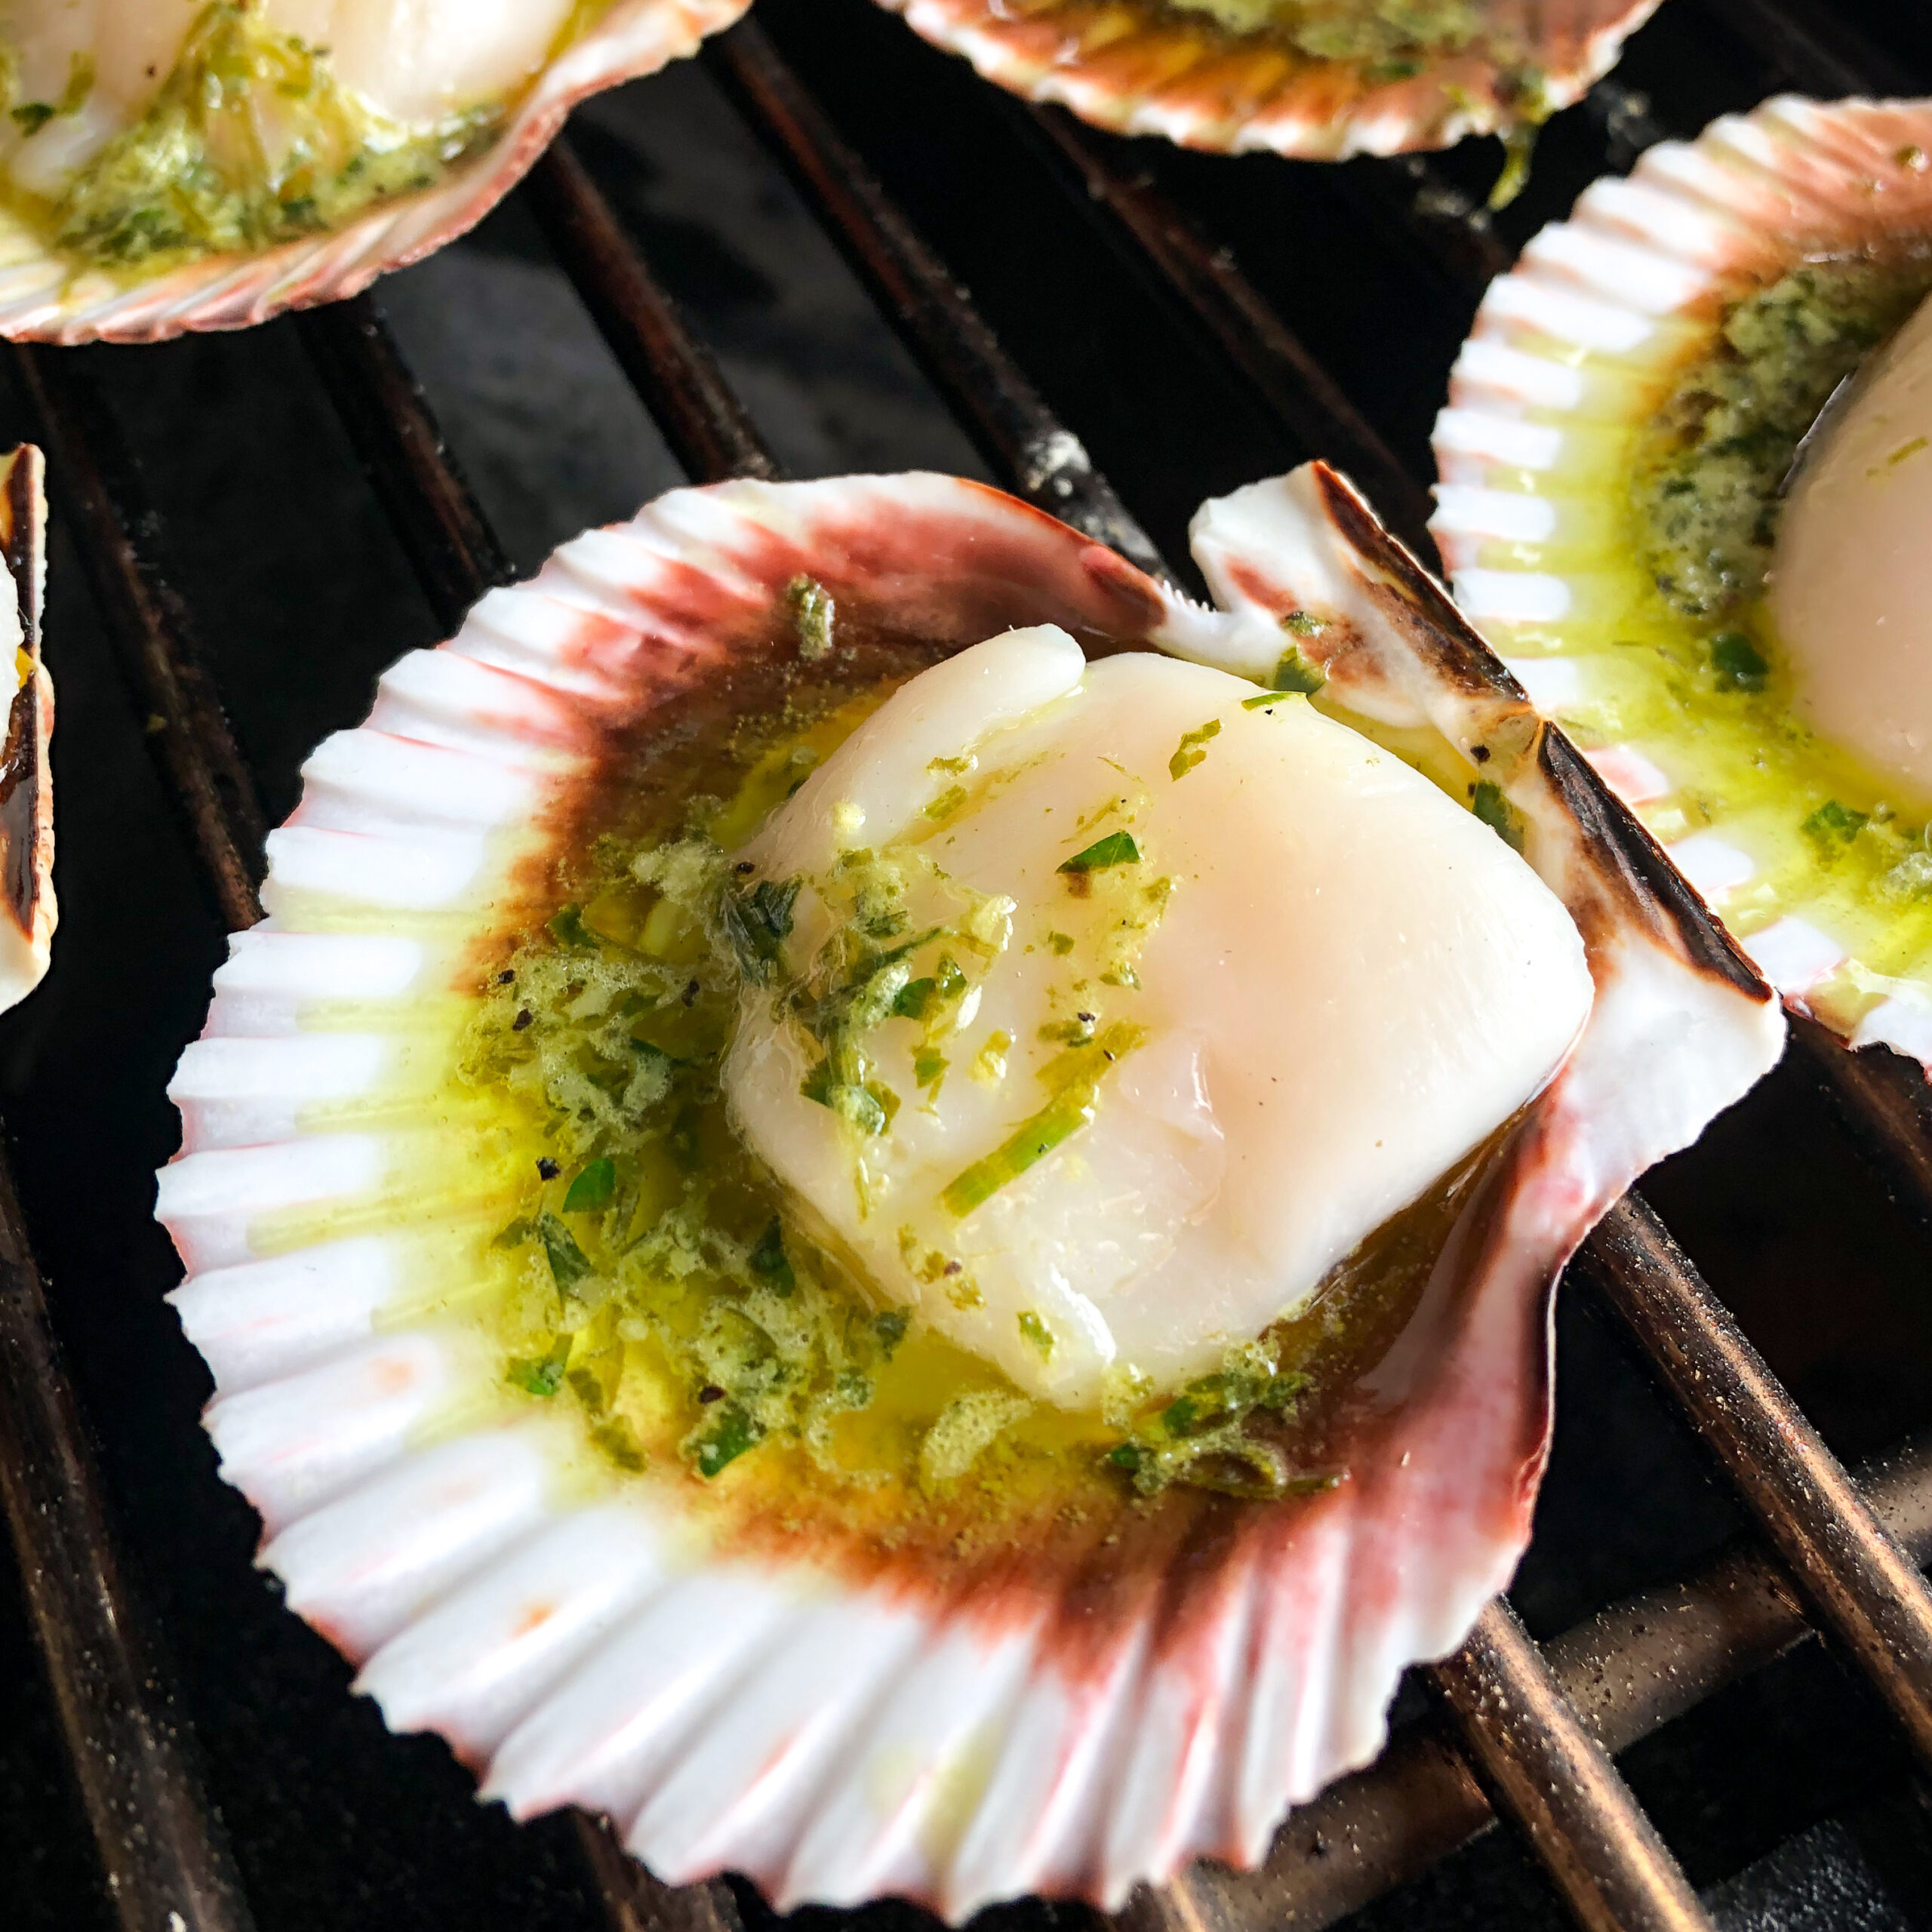 A close up of a scallop in the shell on a grill with an herb butter sauce.